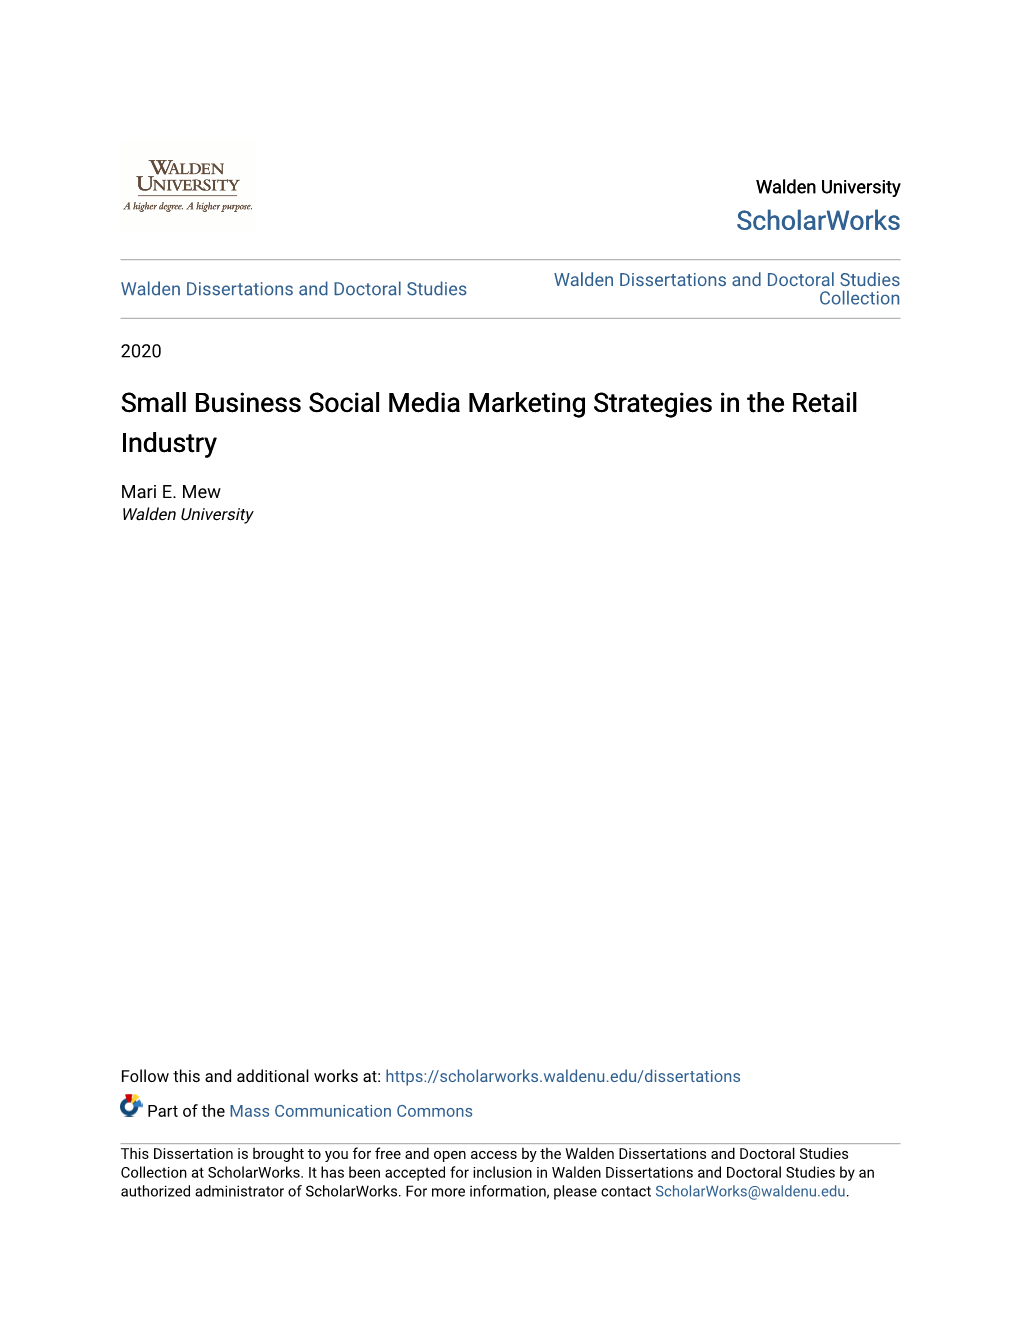 Small Business Social Media Marketing Strategies in the Retail Industry